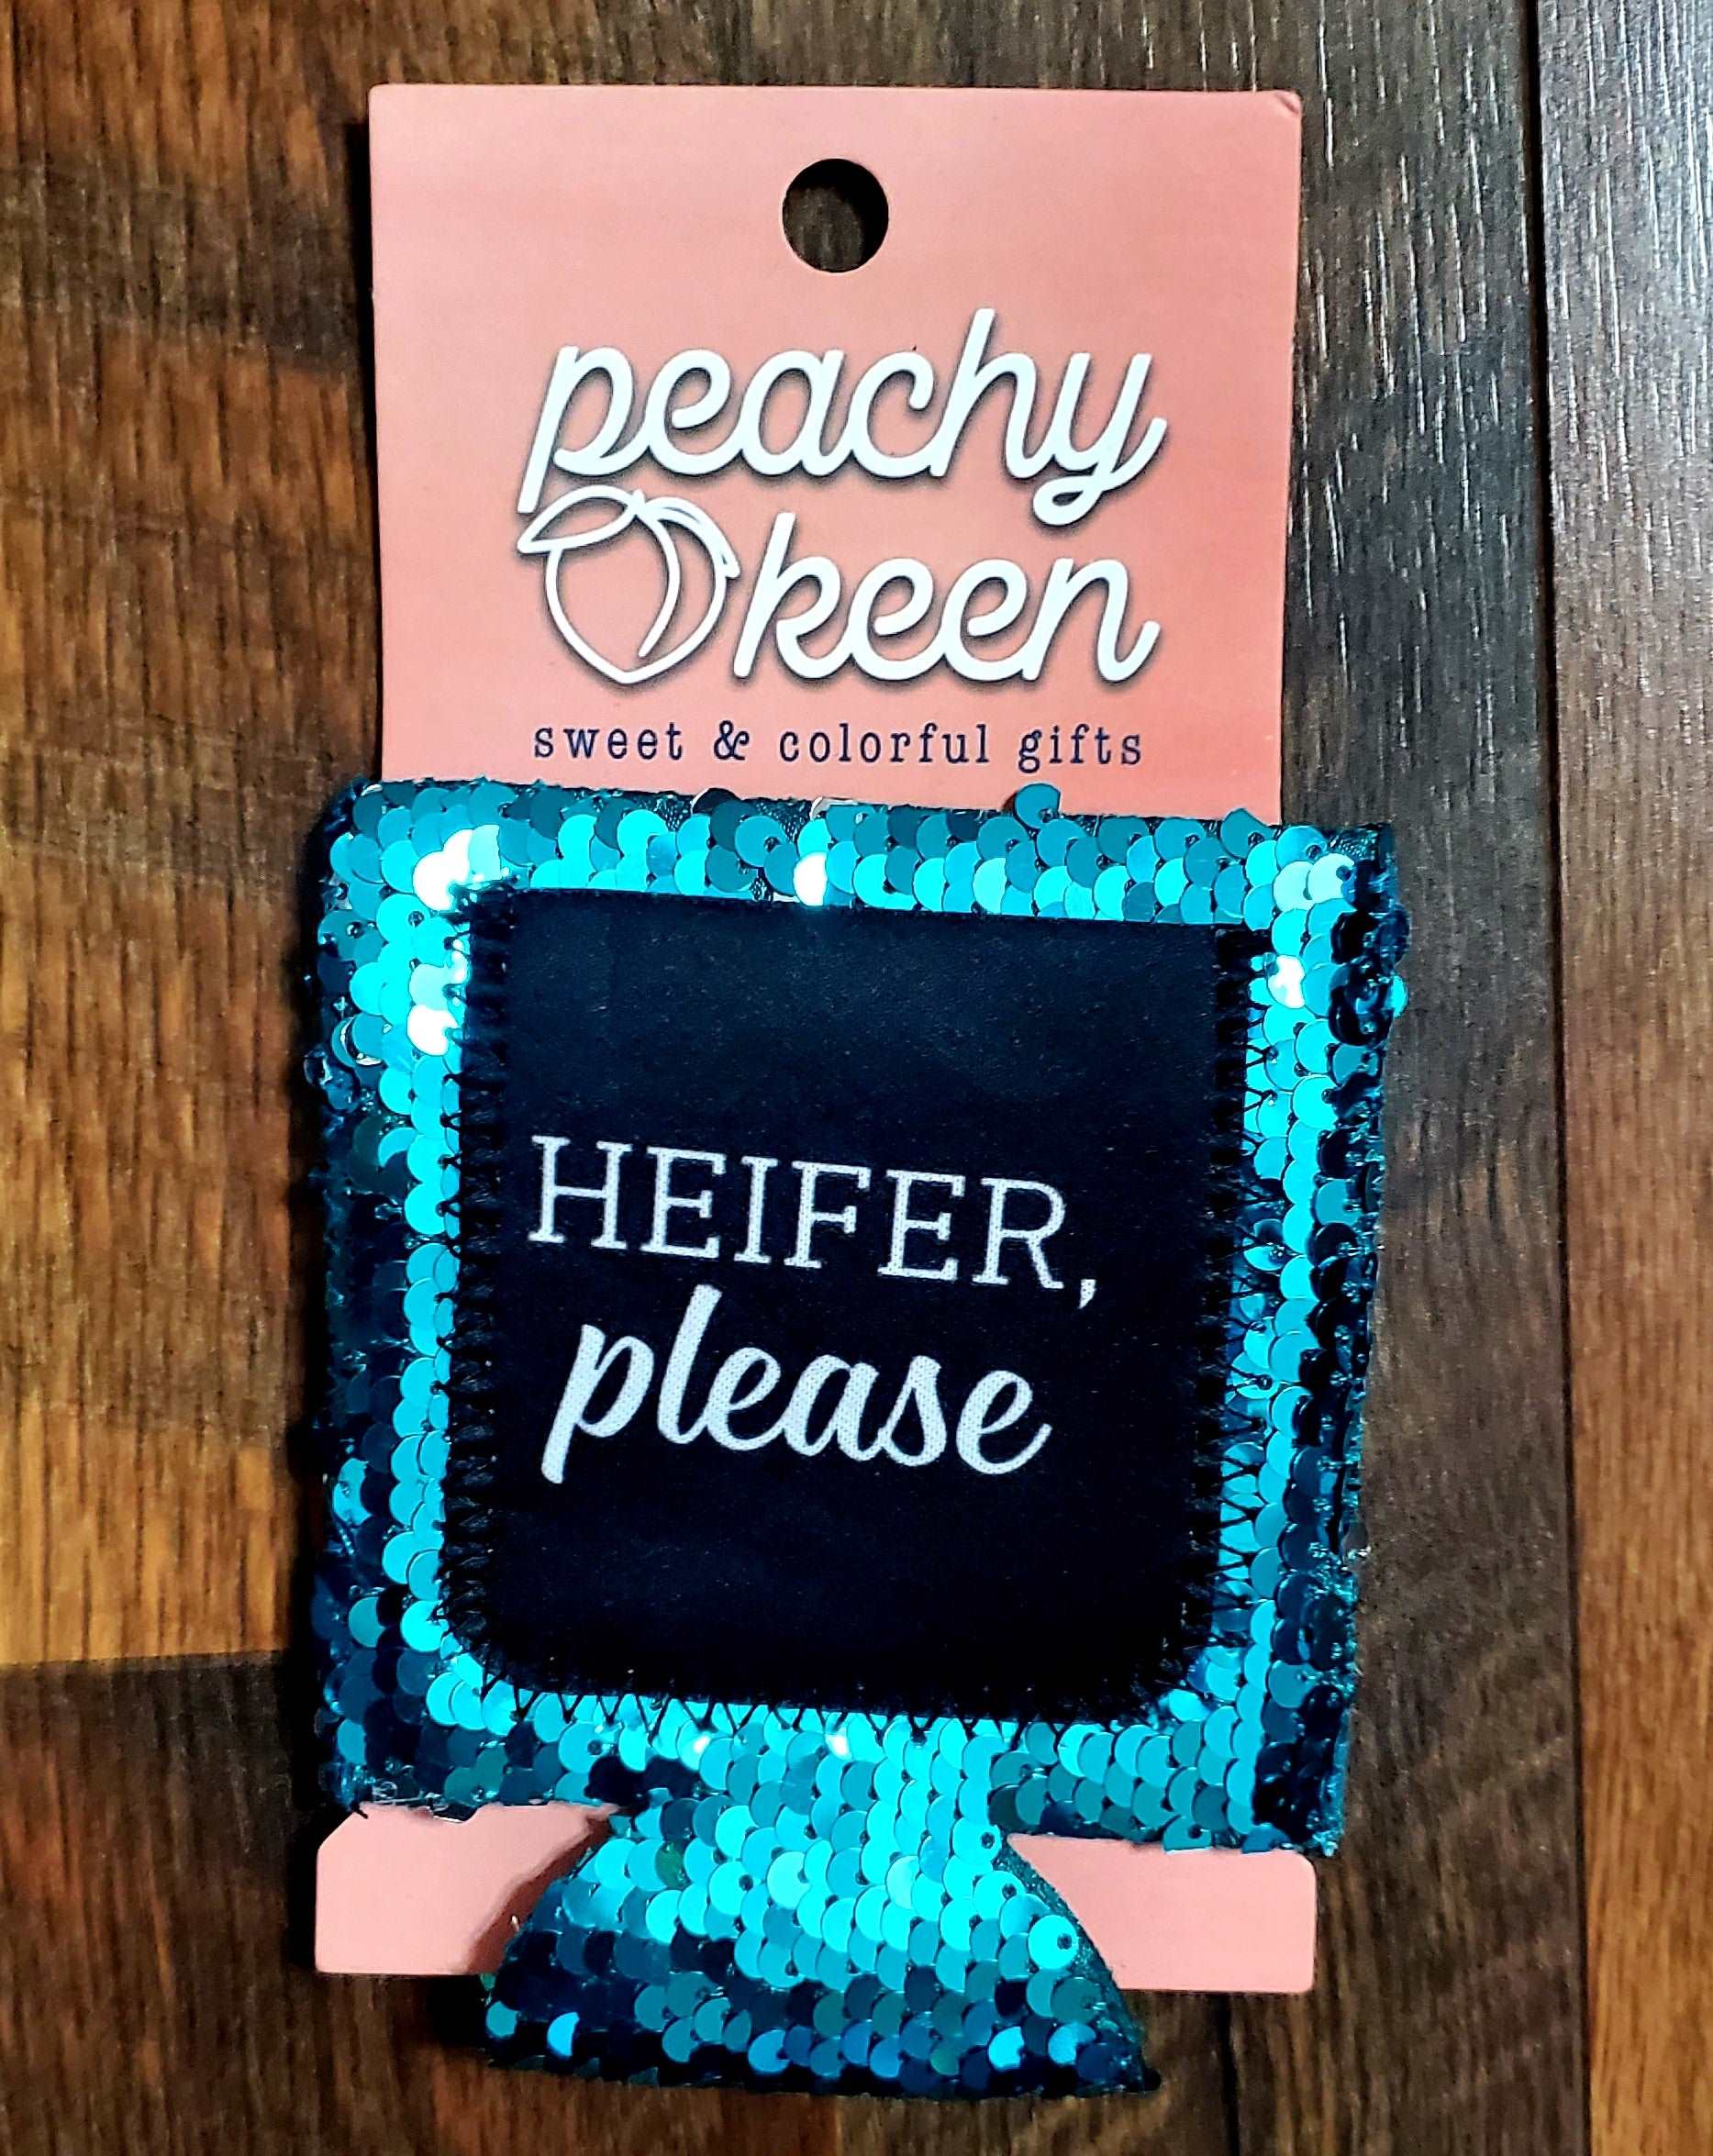 Teal sequin can cooler that says heifer please.